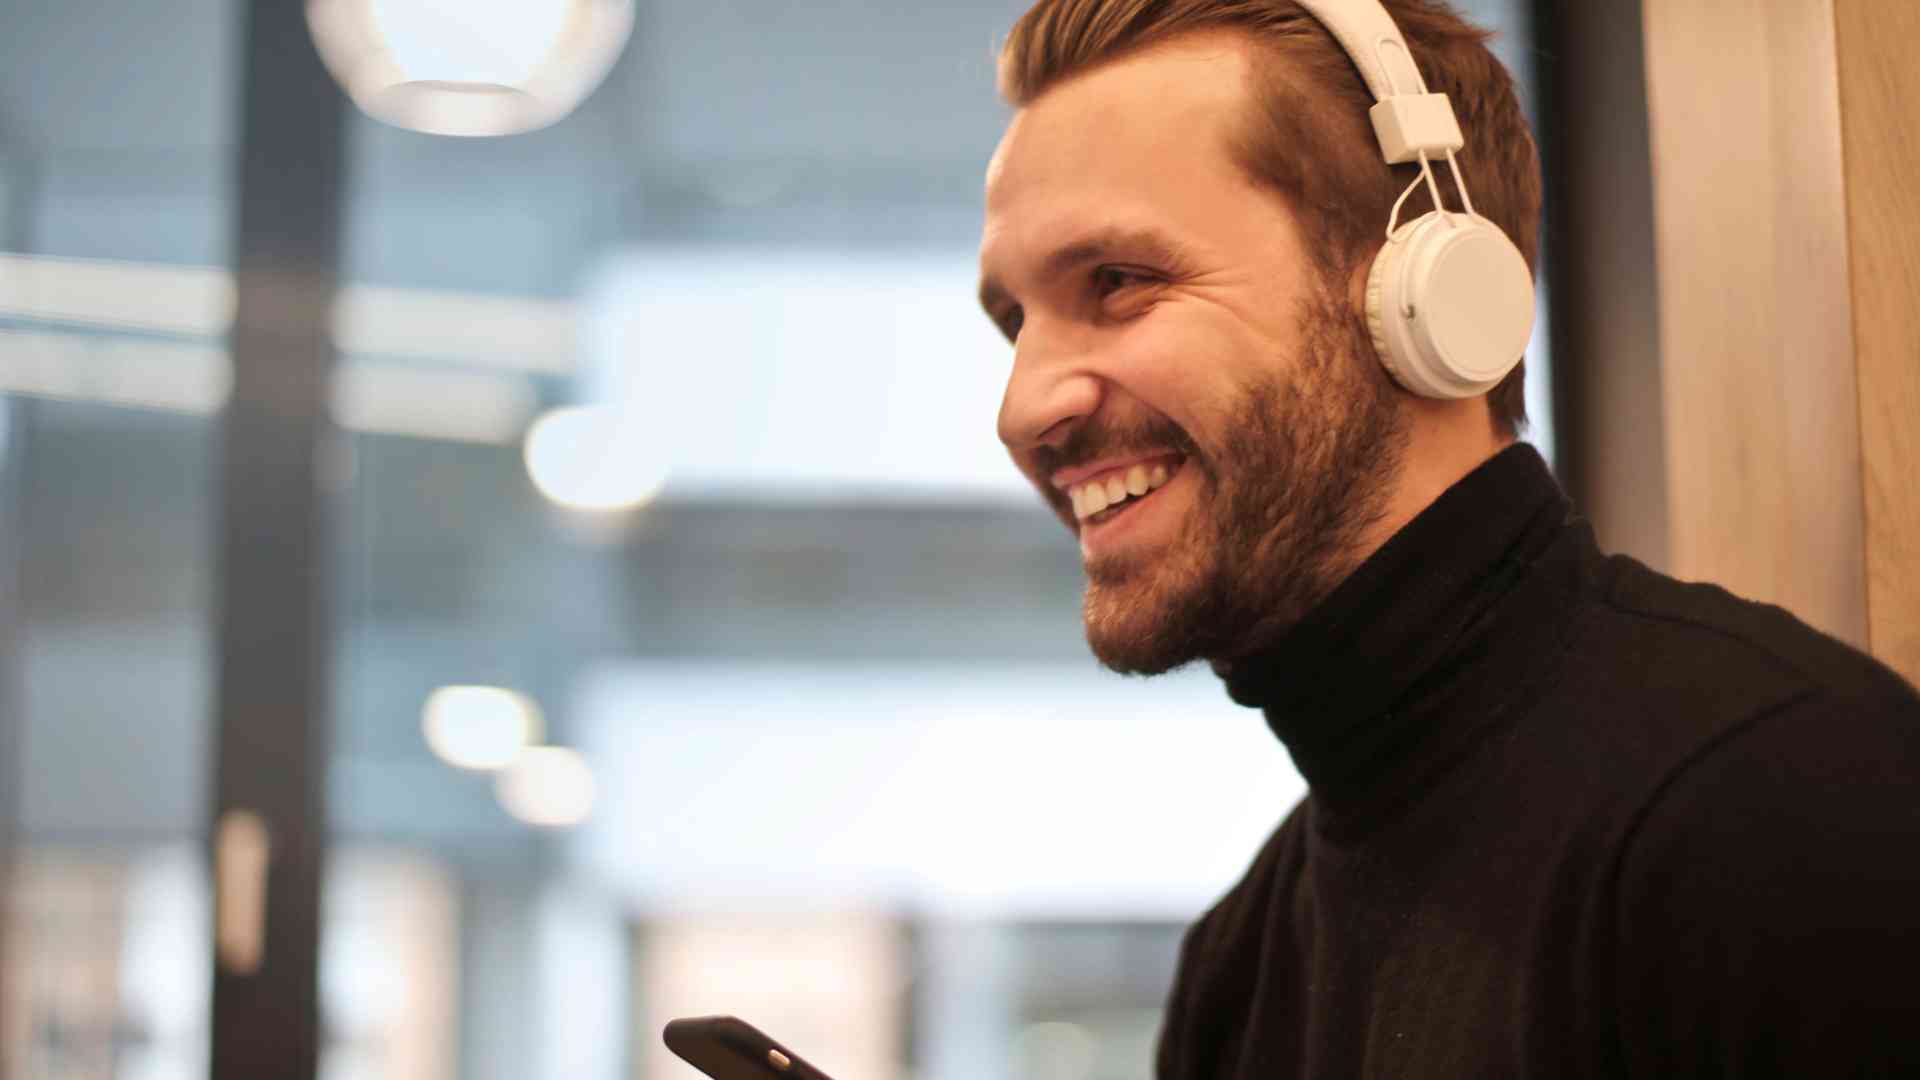 can wearing headphones cause hair loss